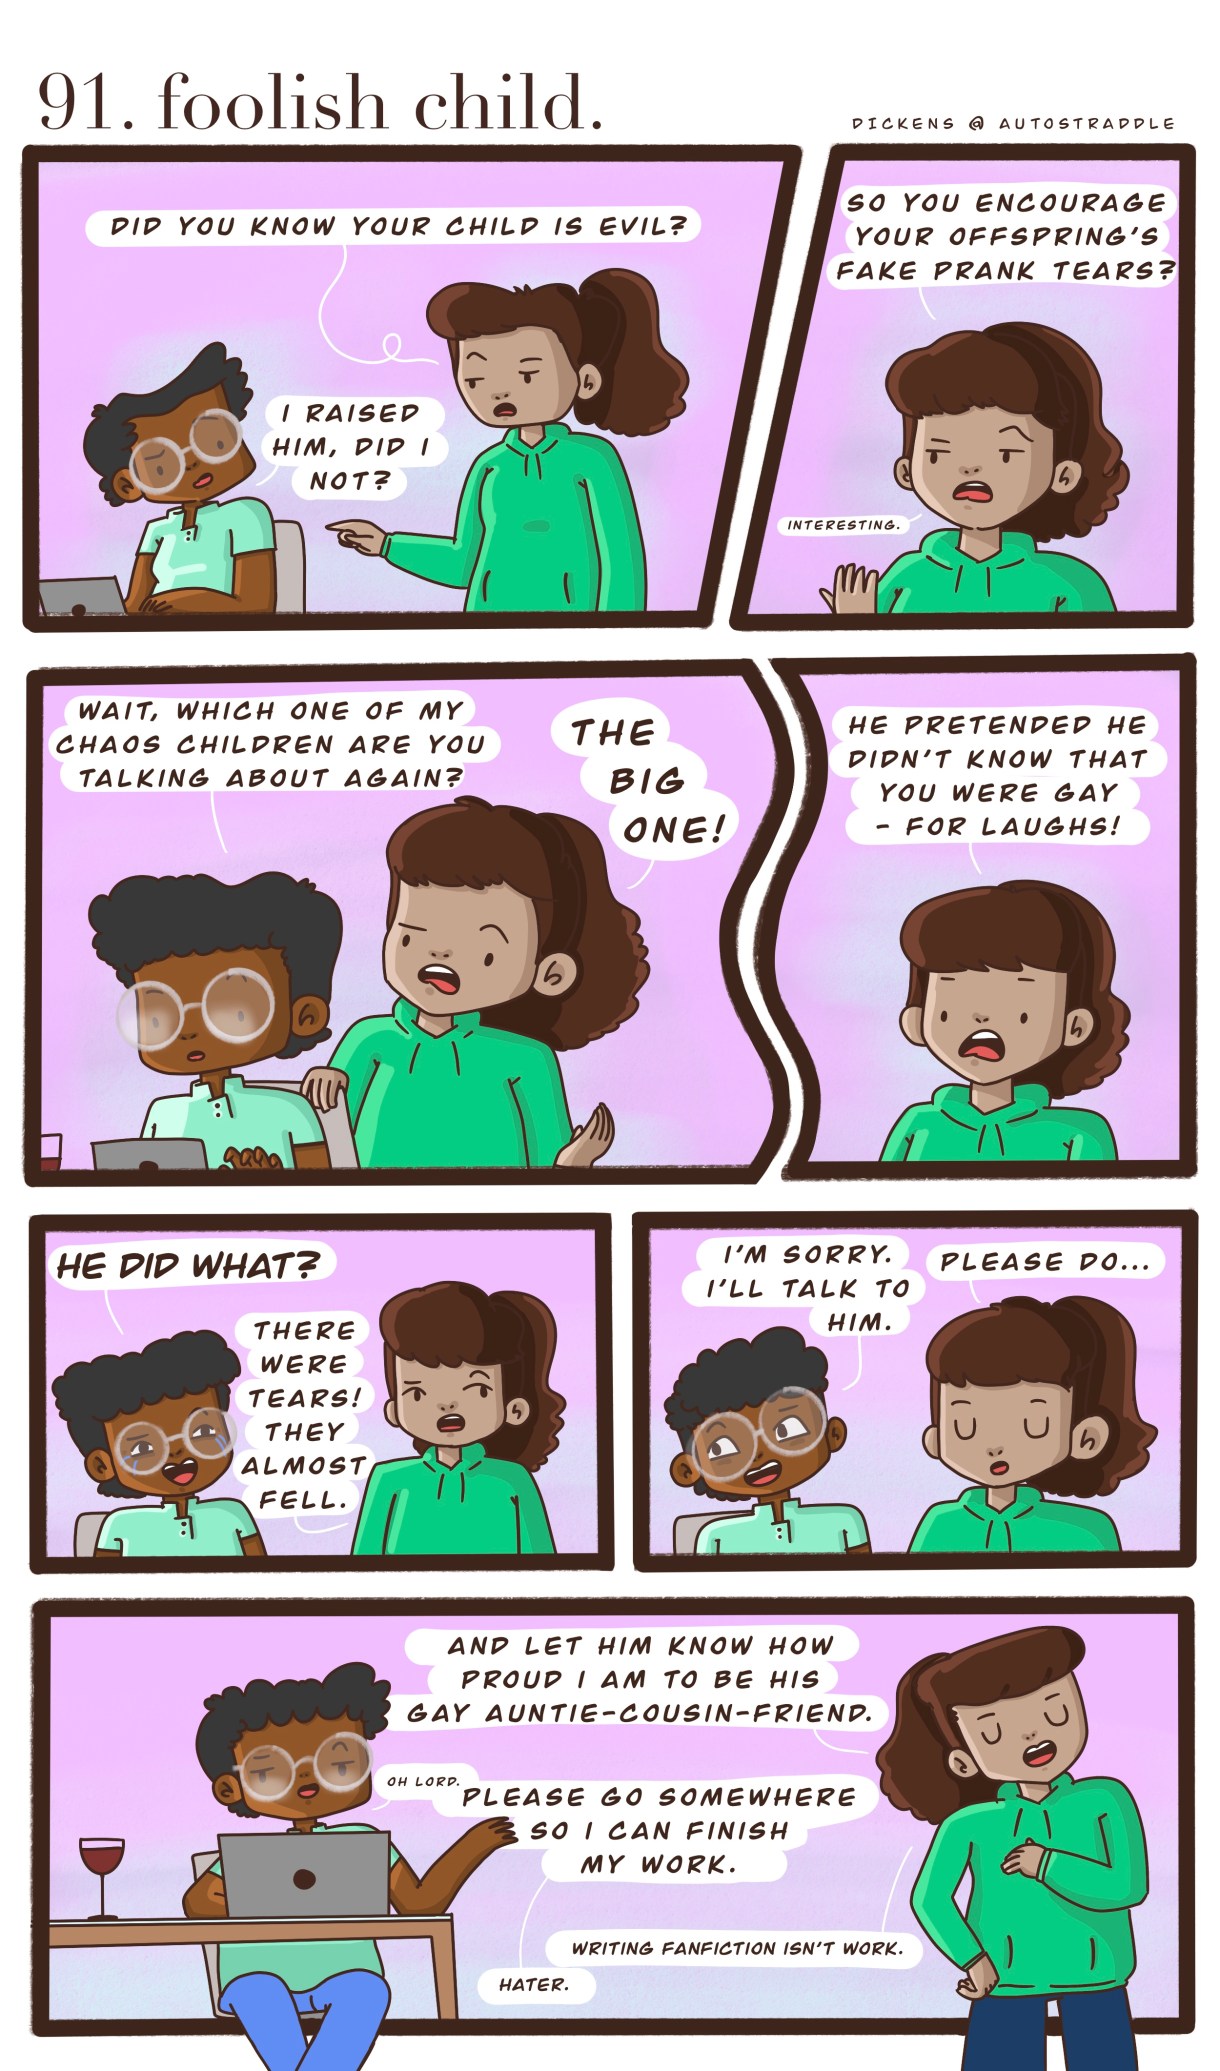 In a two panel comic with a pink background, Dickens is working at a computer. Their friend comes up to them and says "Do you know your child is evil?" Dickens feigns surprise. The friend goes on to explain that their child pretended not to know Dickens was gay — for laughs! Dickens agrees to talk to him, and the friend agrees. She thinks Dickens should talk to him and let him know how proud she is to be his "gay auntie-cousin-friend" and then walks away laughing. Dickens calls over the shoulder, grumbling about being interrupted at work. Their friend responds, "writing fan fiction is NOT work!"